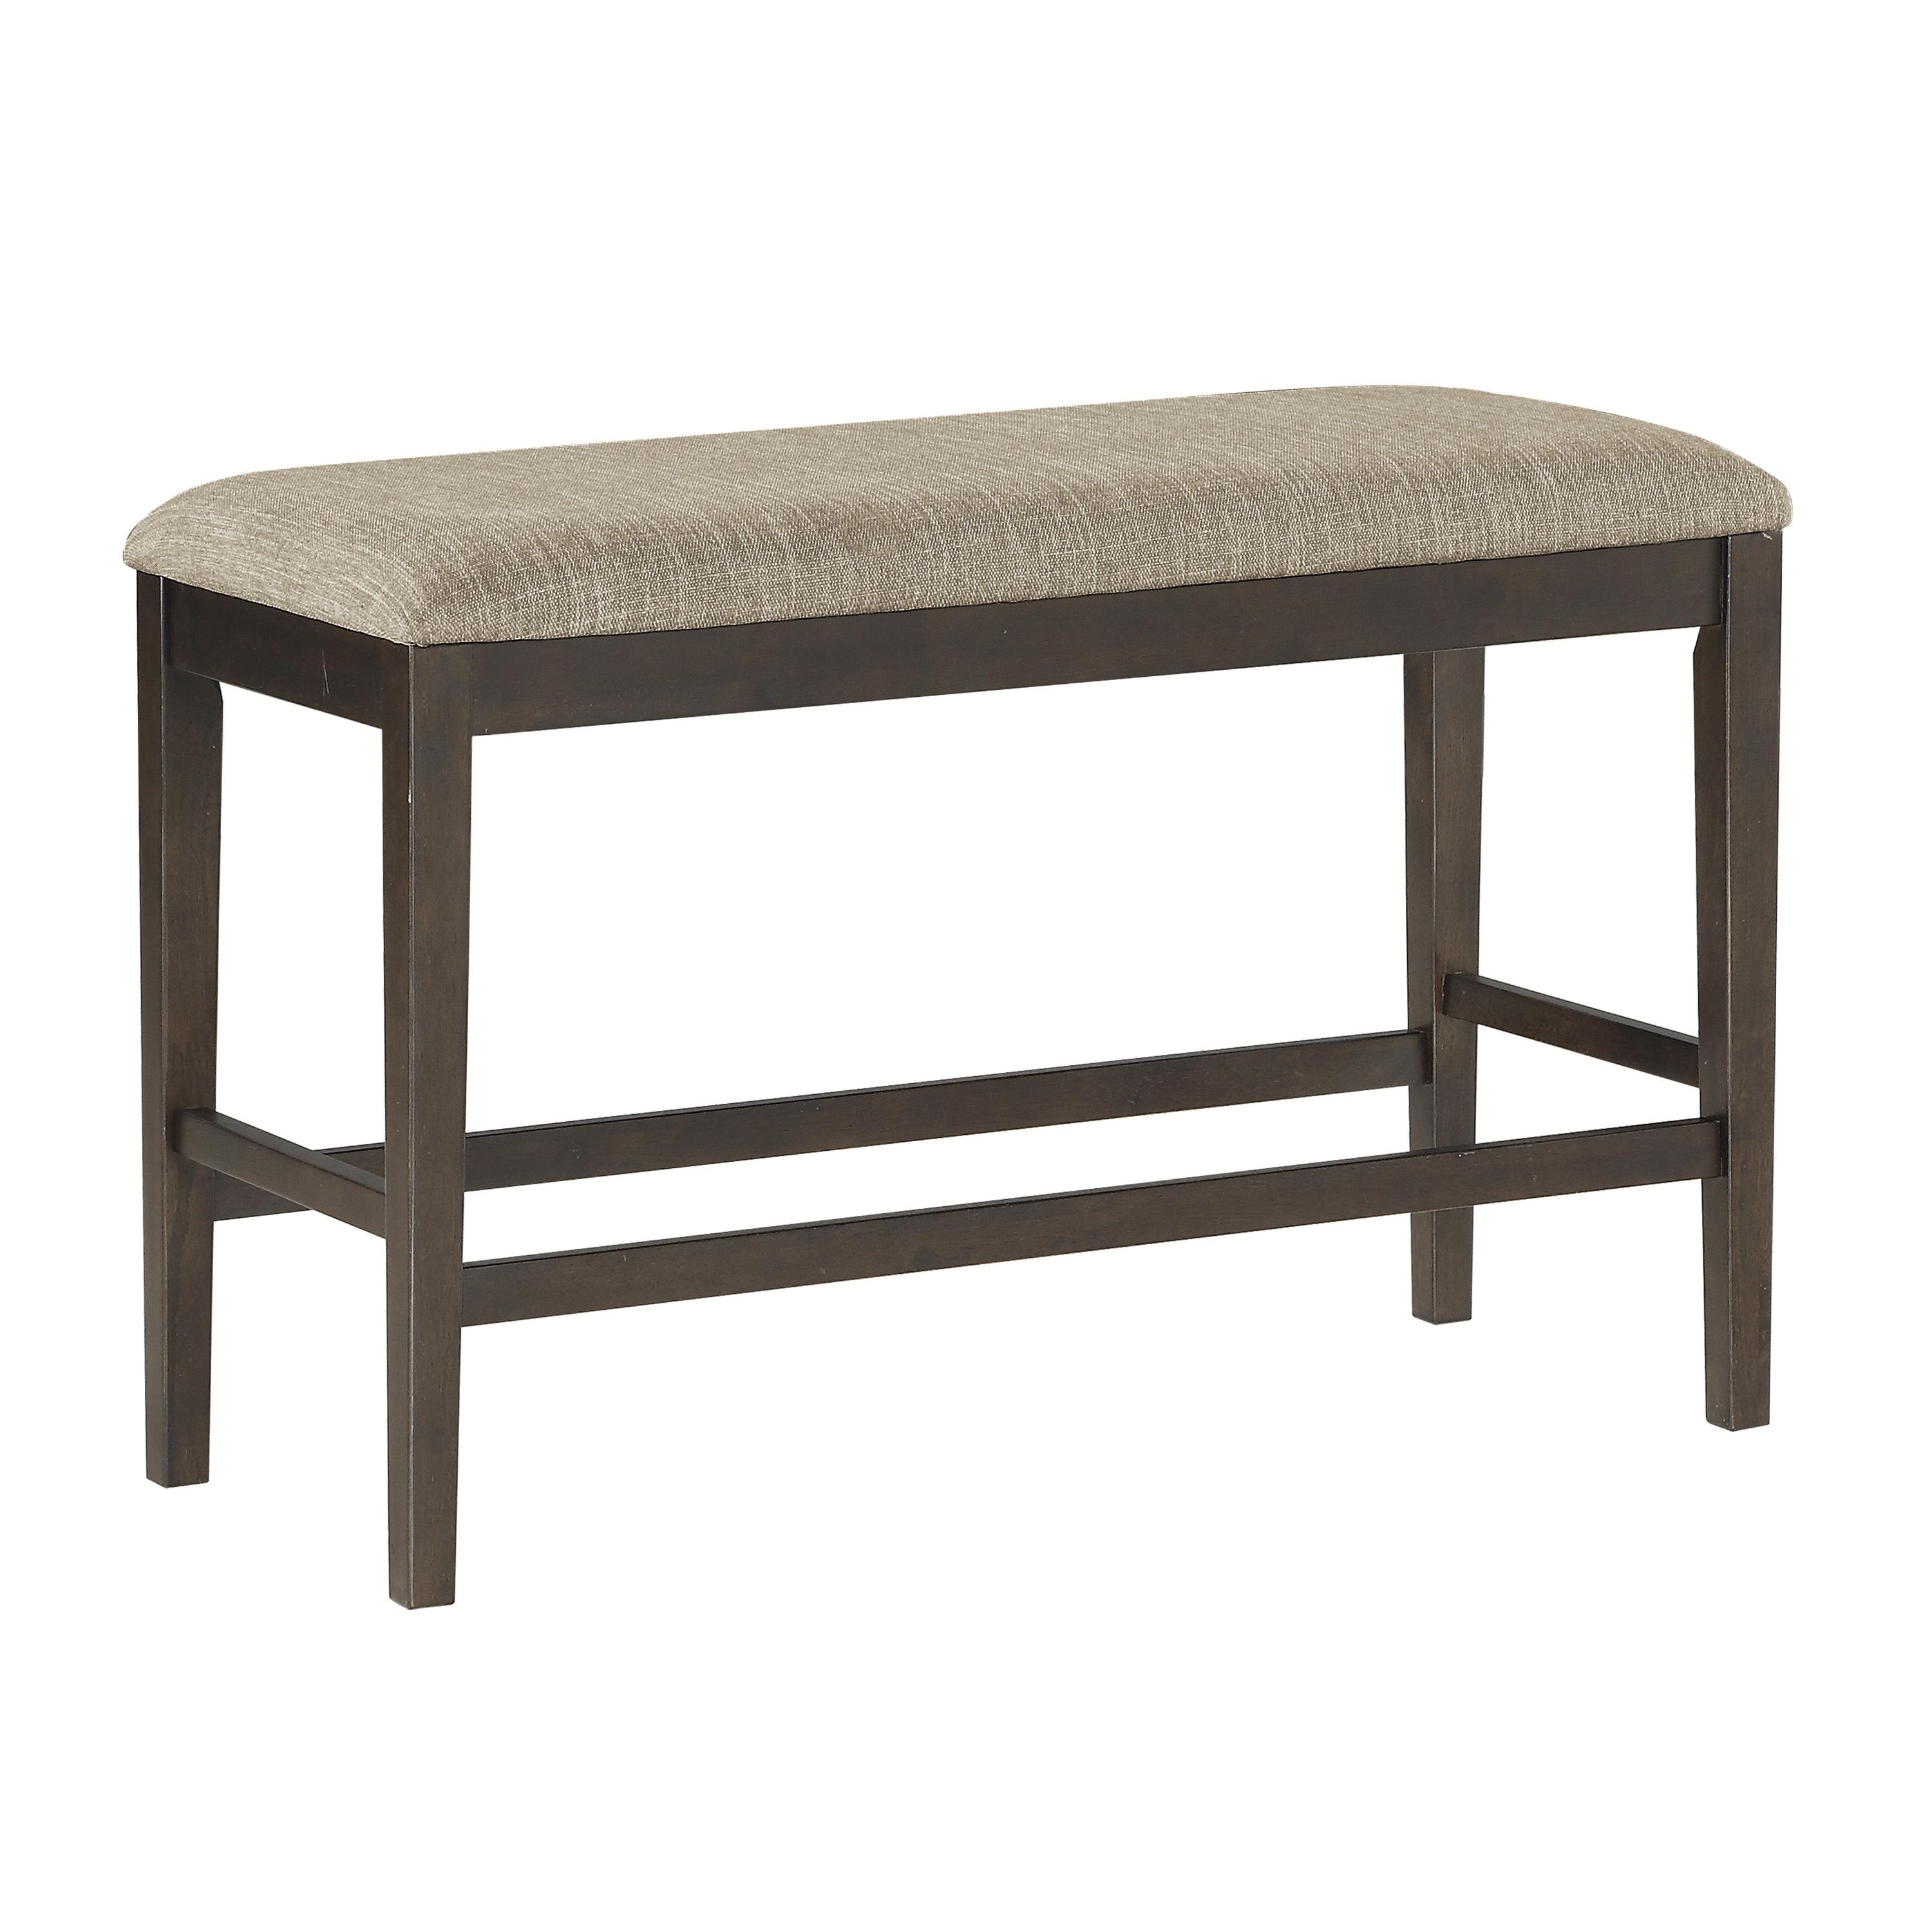 Rustic Counter Height Bench 5716-24BH Balin 5716-24BH in Dark Brown Polyester